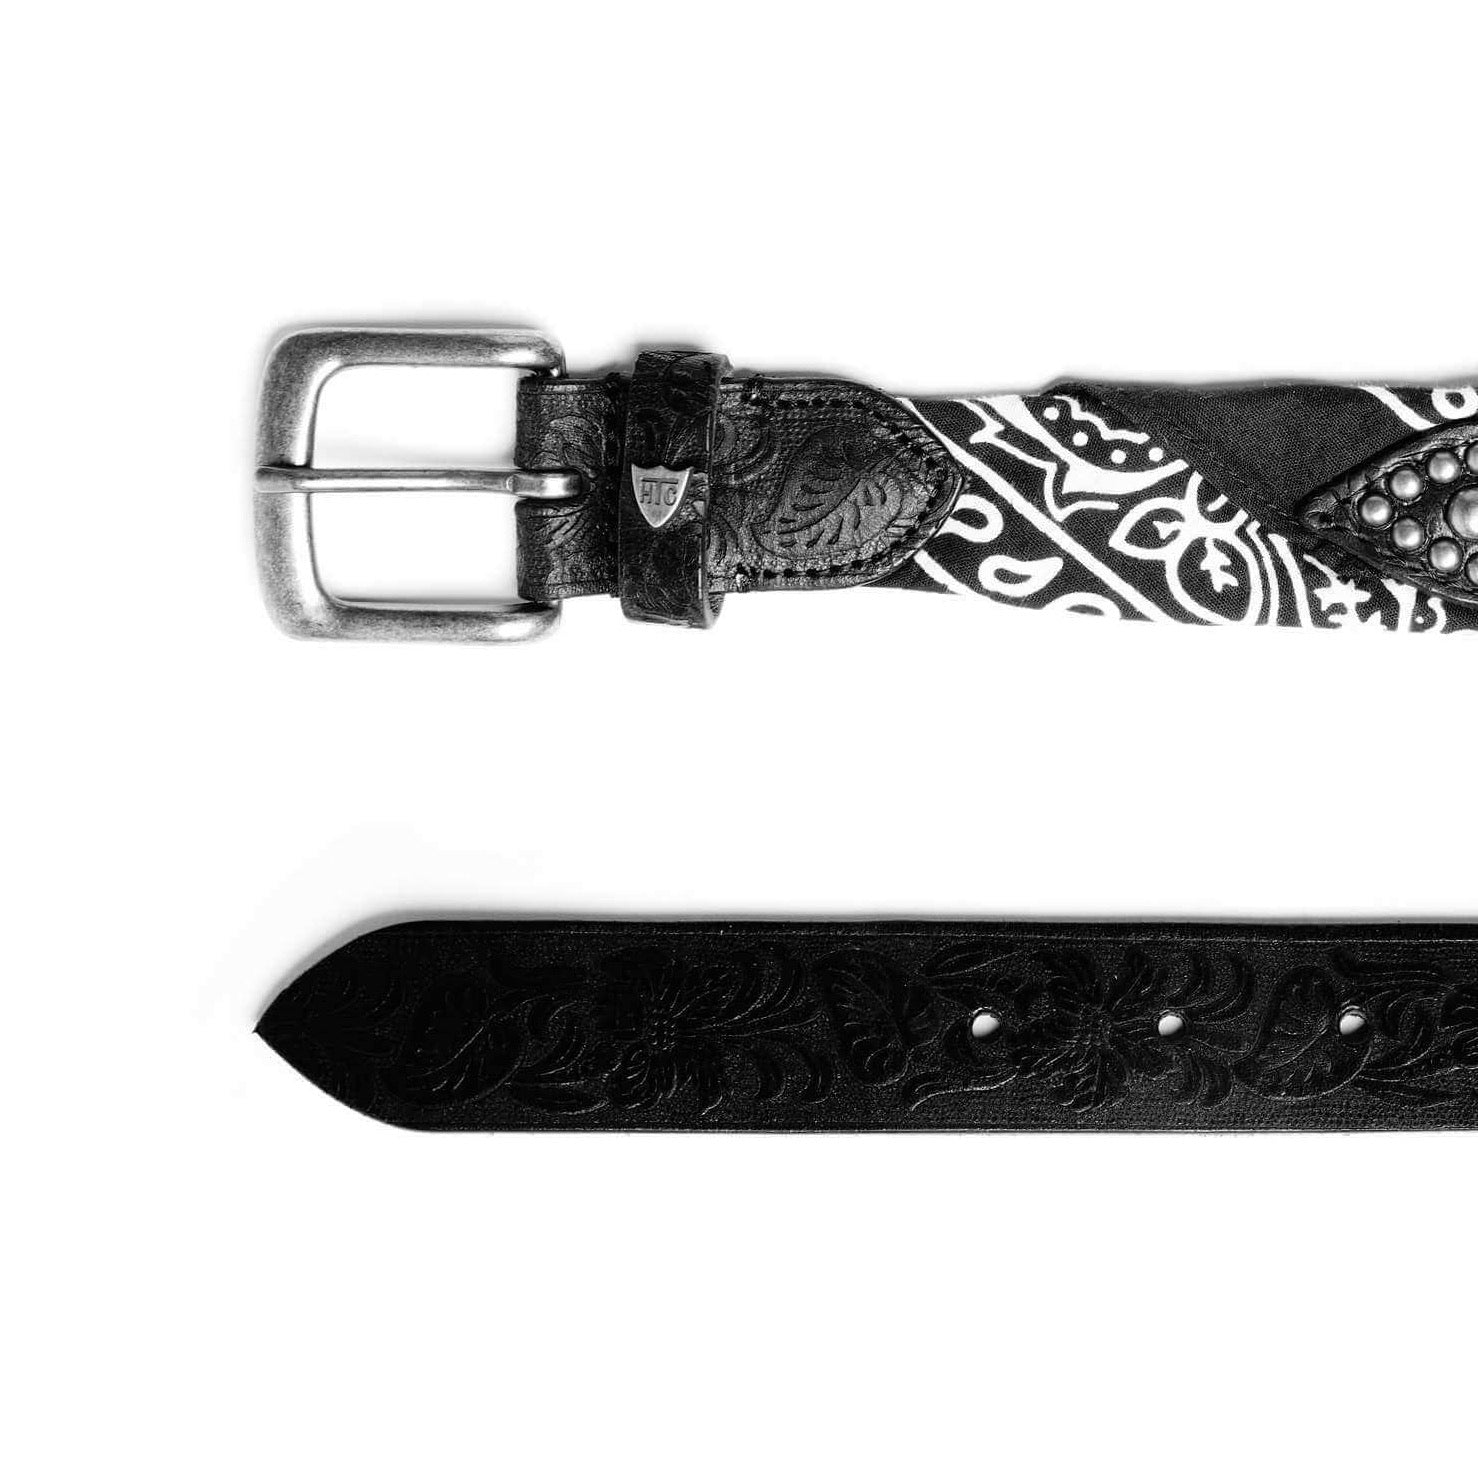 BANDANA BELT Black carved leather belt, paisley black bandana with studs and leather details. Height: 3,5 cm. Made in Italy. HTC LOS ANGELES